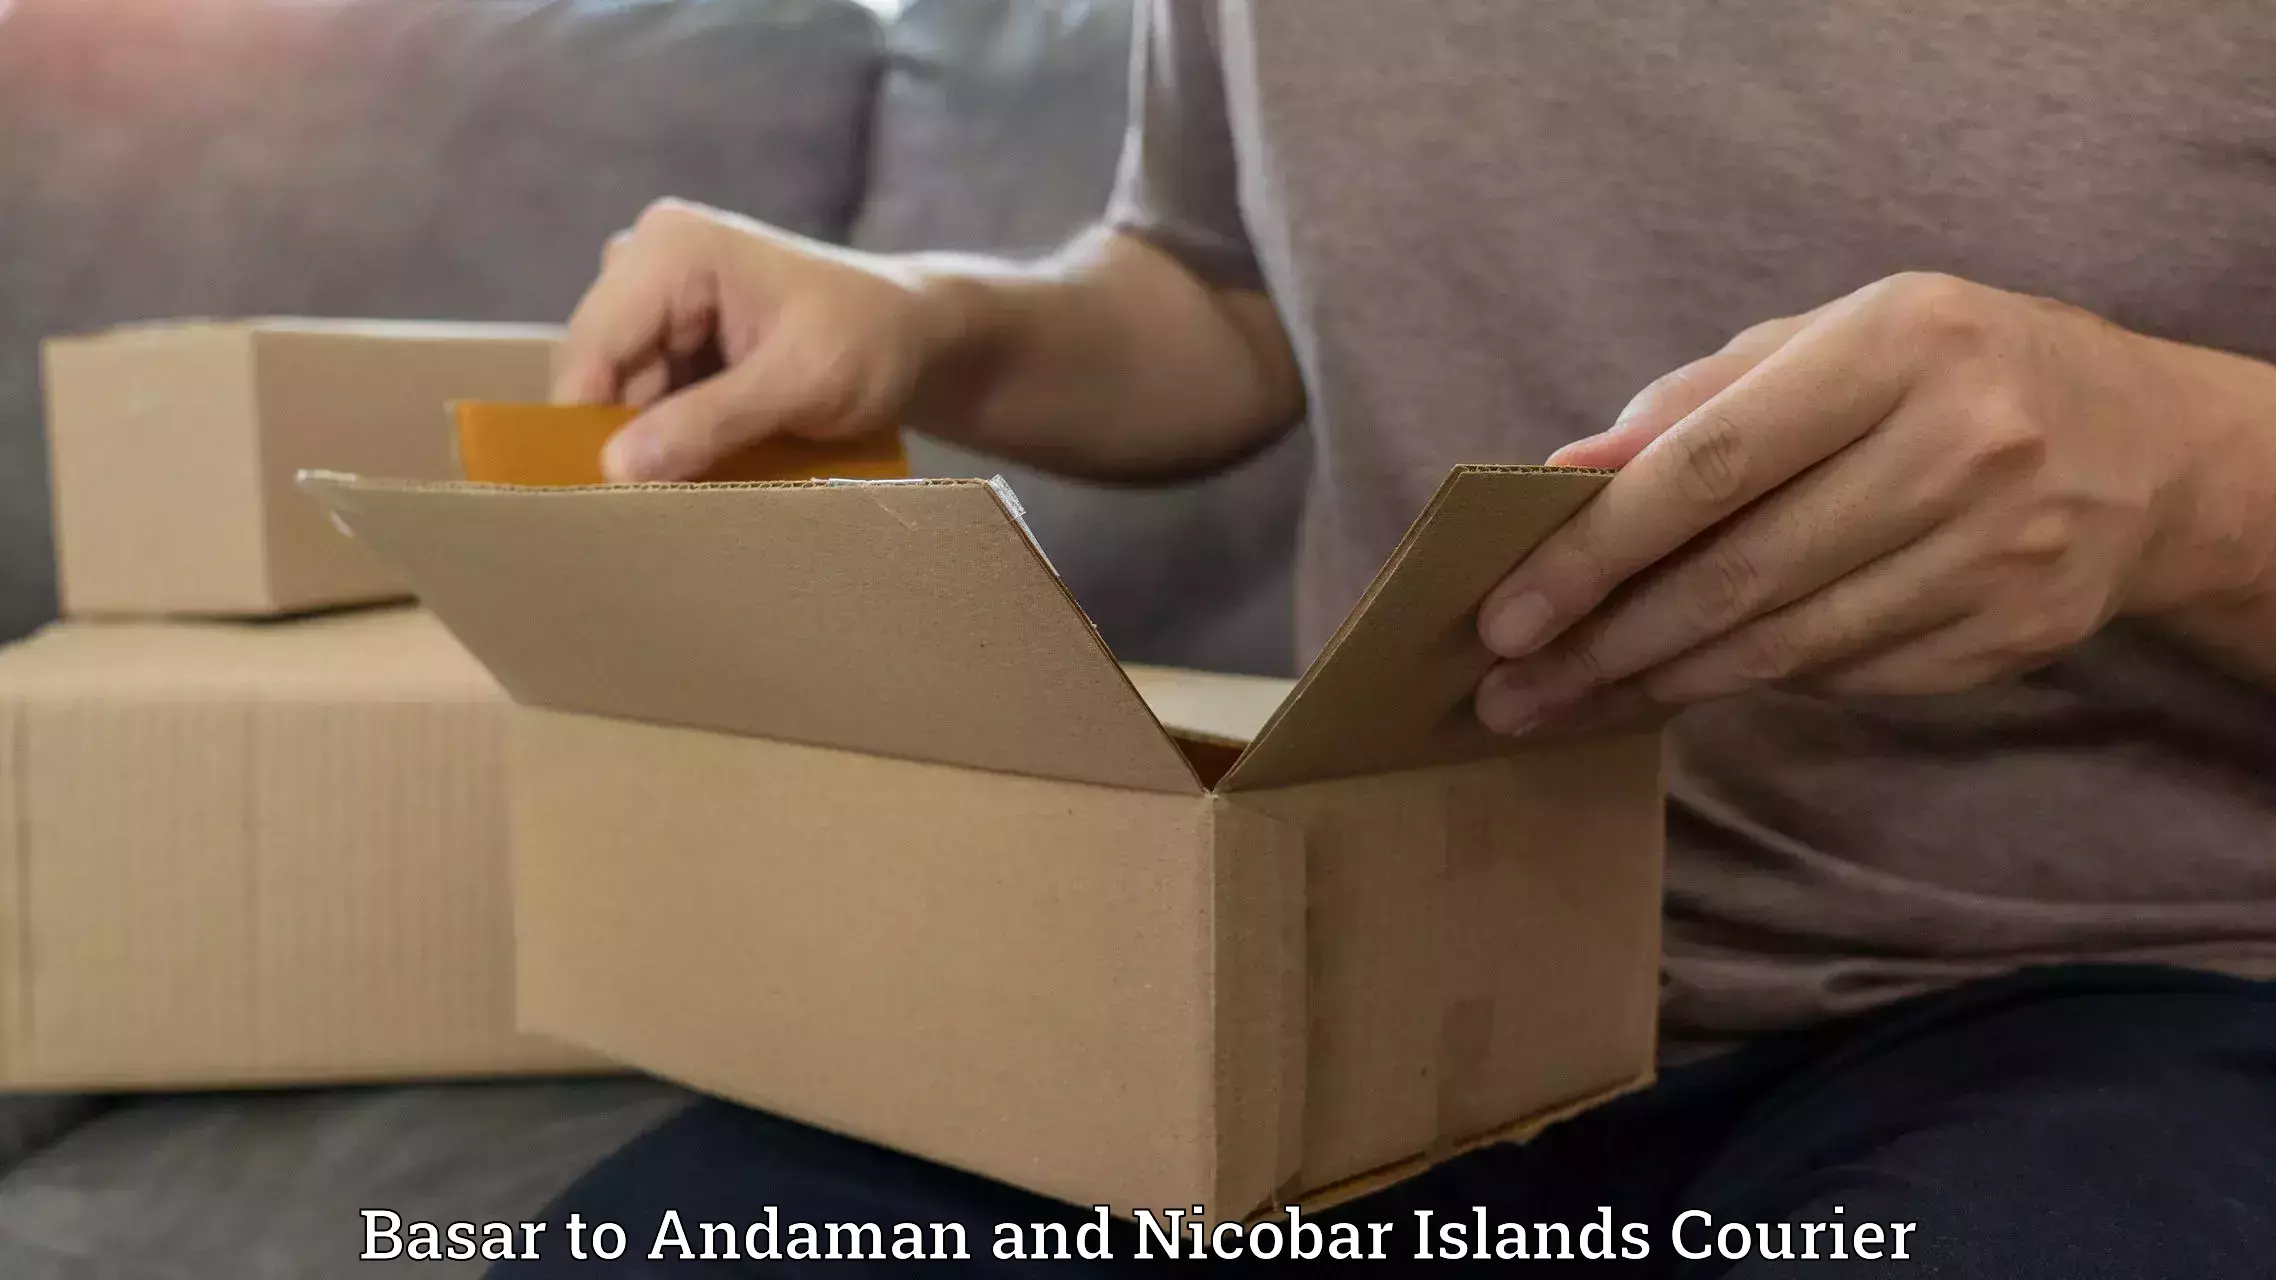 Subscription-based courier Basar to Andaman and Nicobar Islands